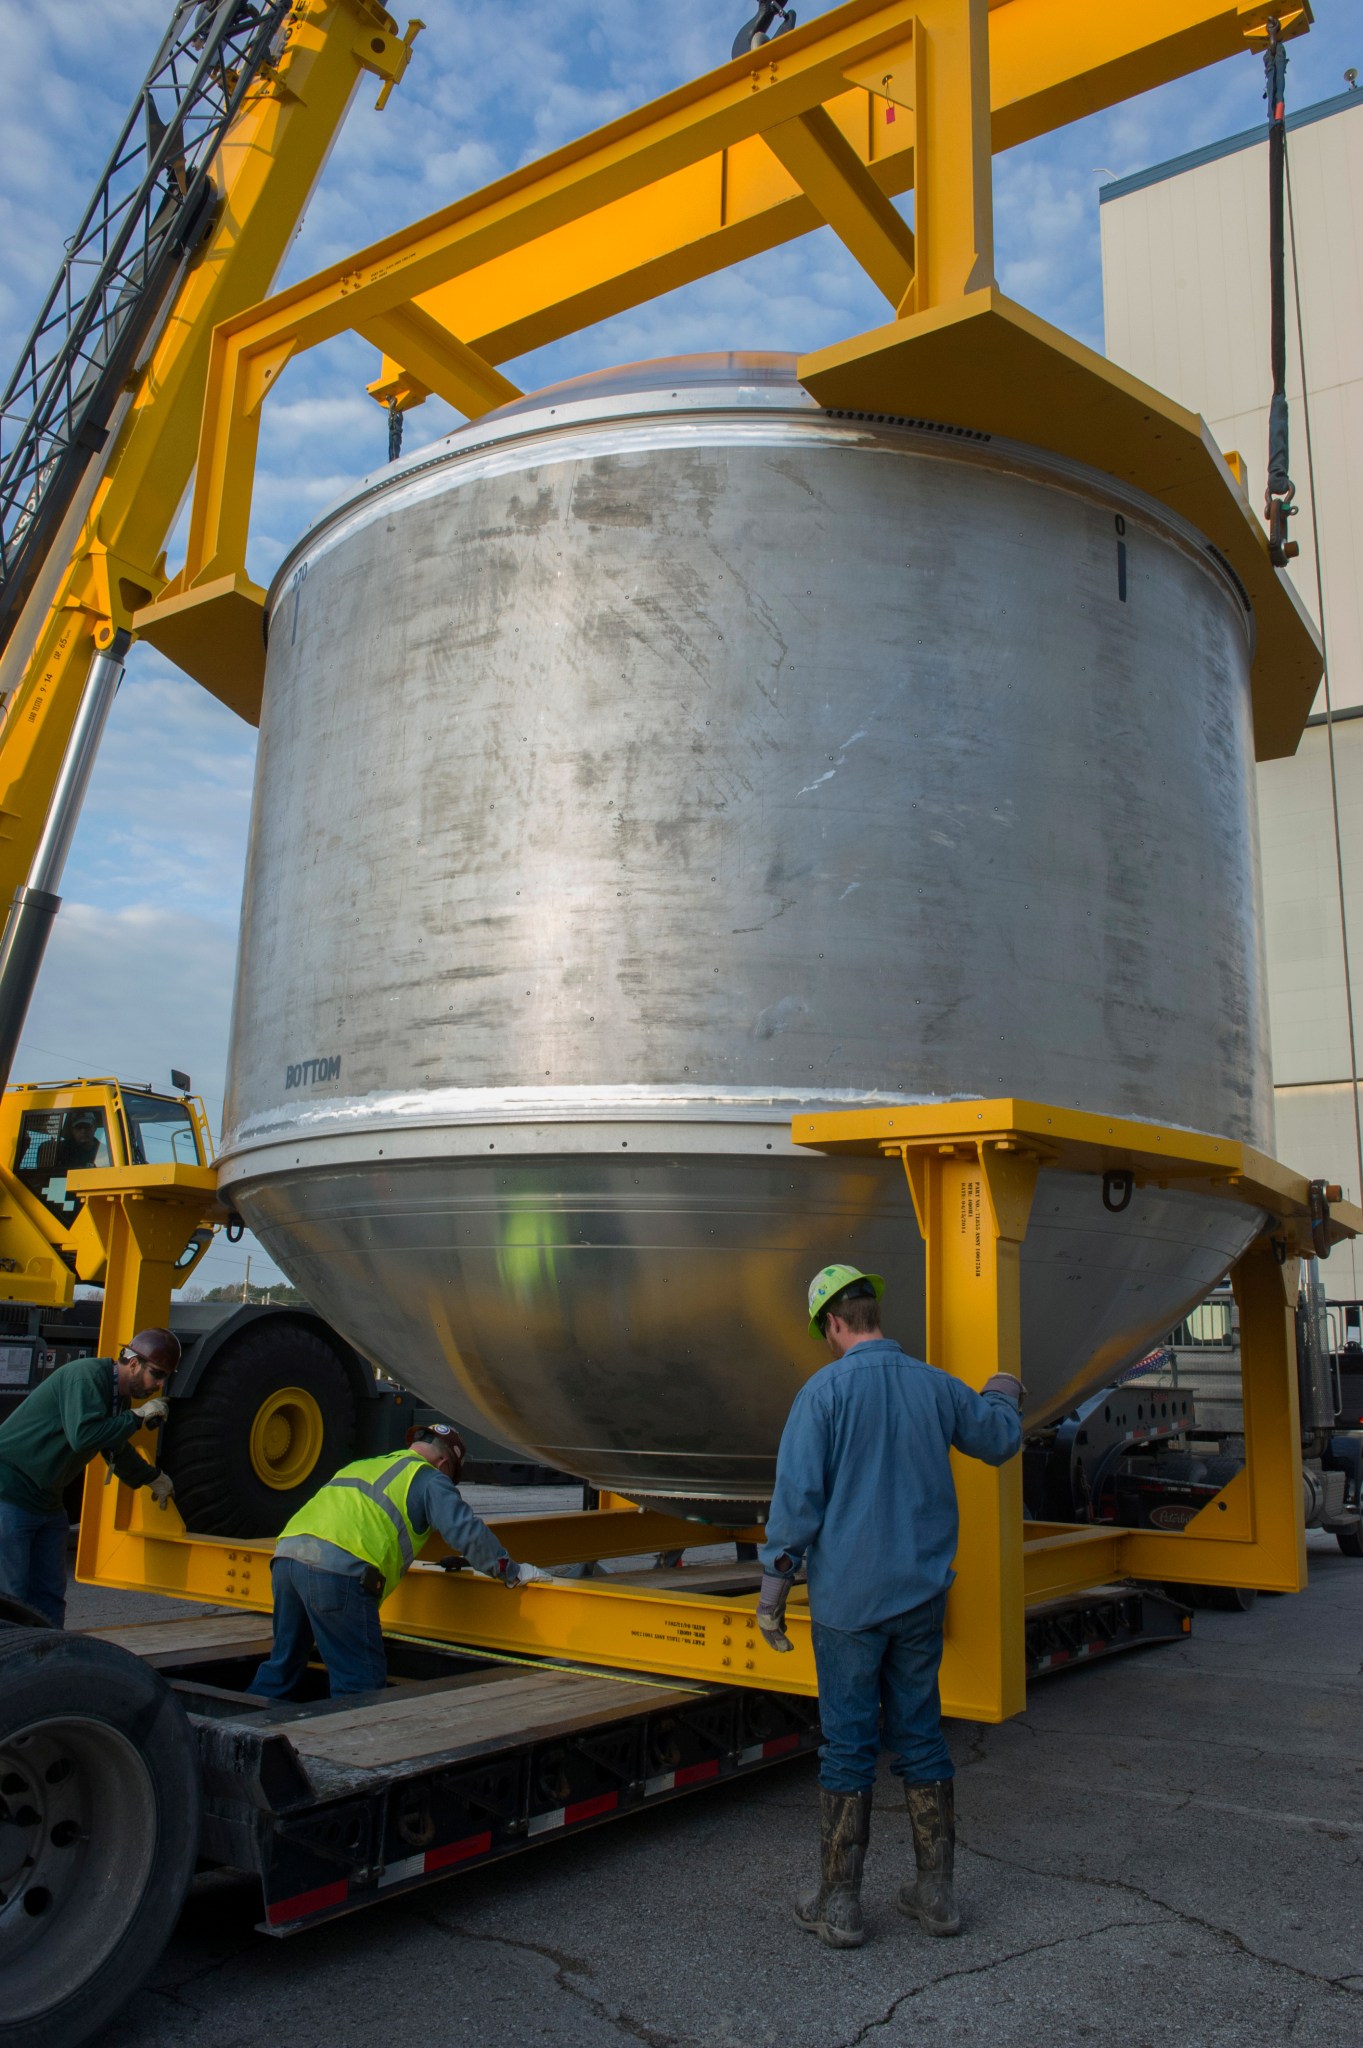 A massive cryogenic tank is loaded onto a truck at NASA's Marshall Space Flight Center.